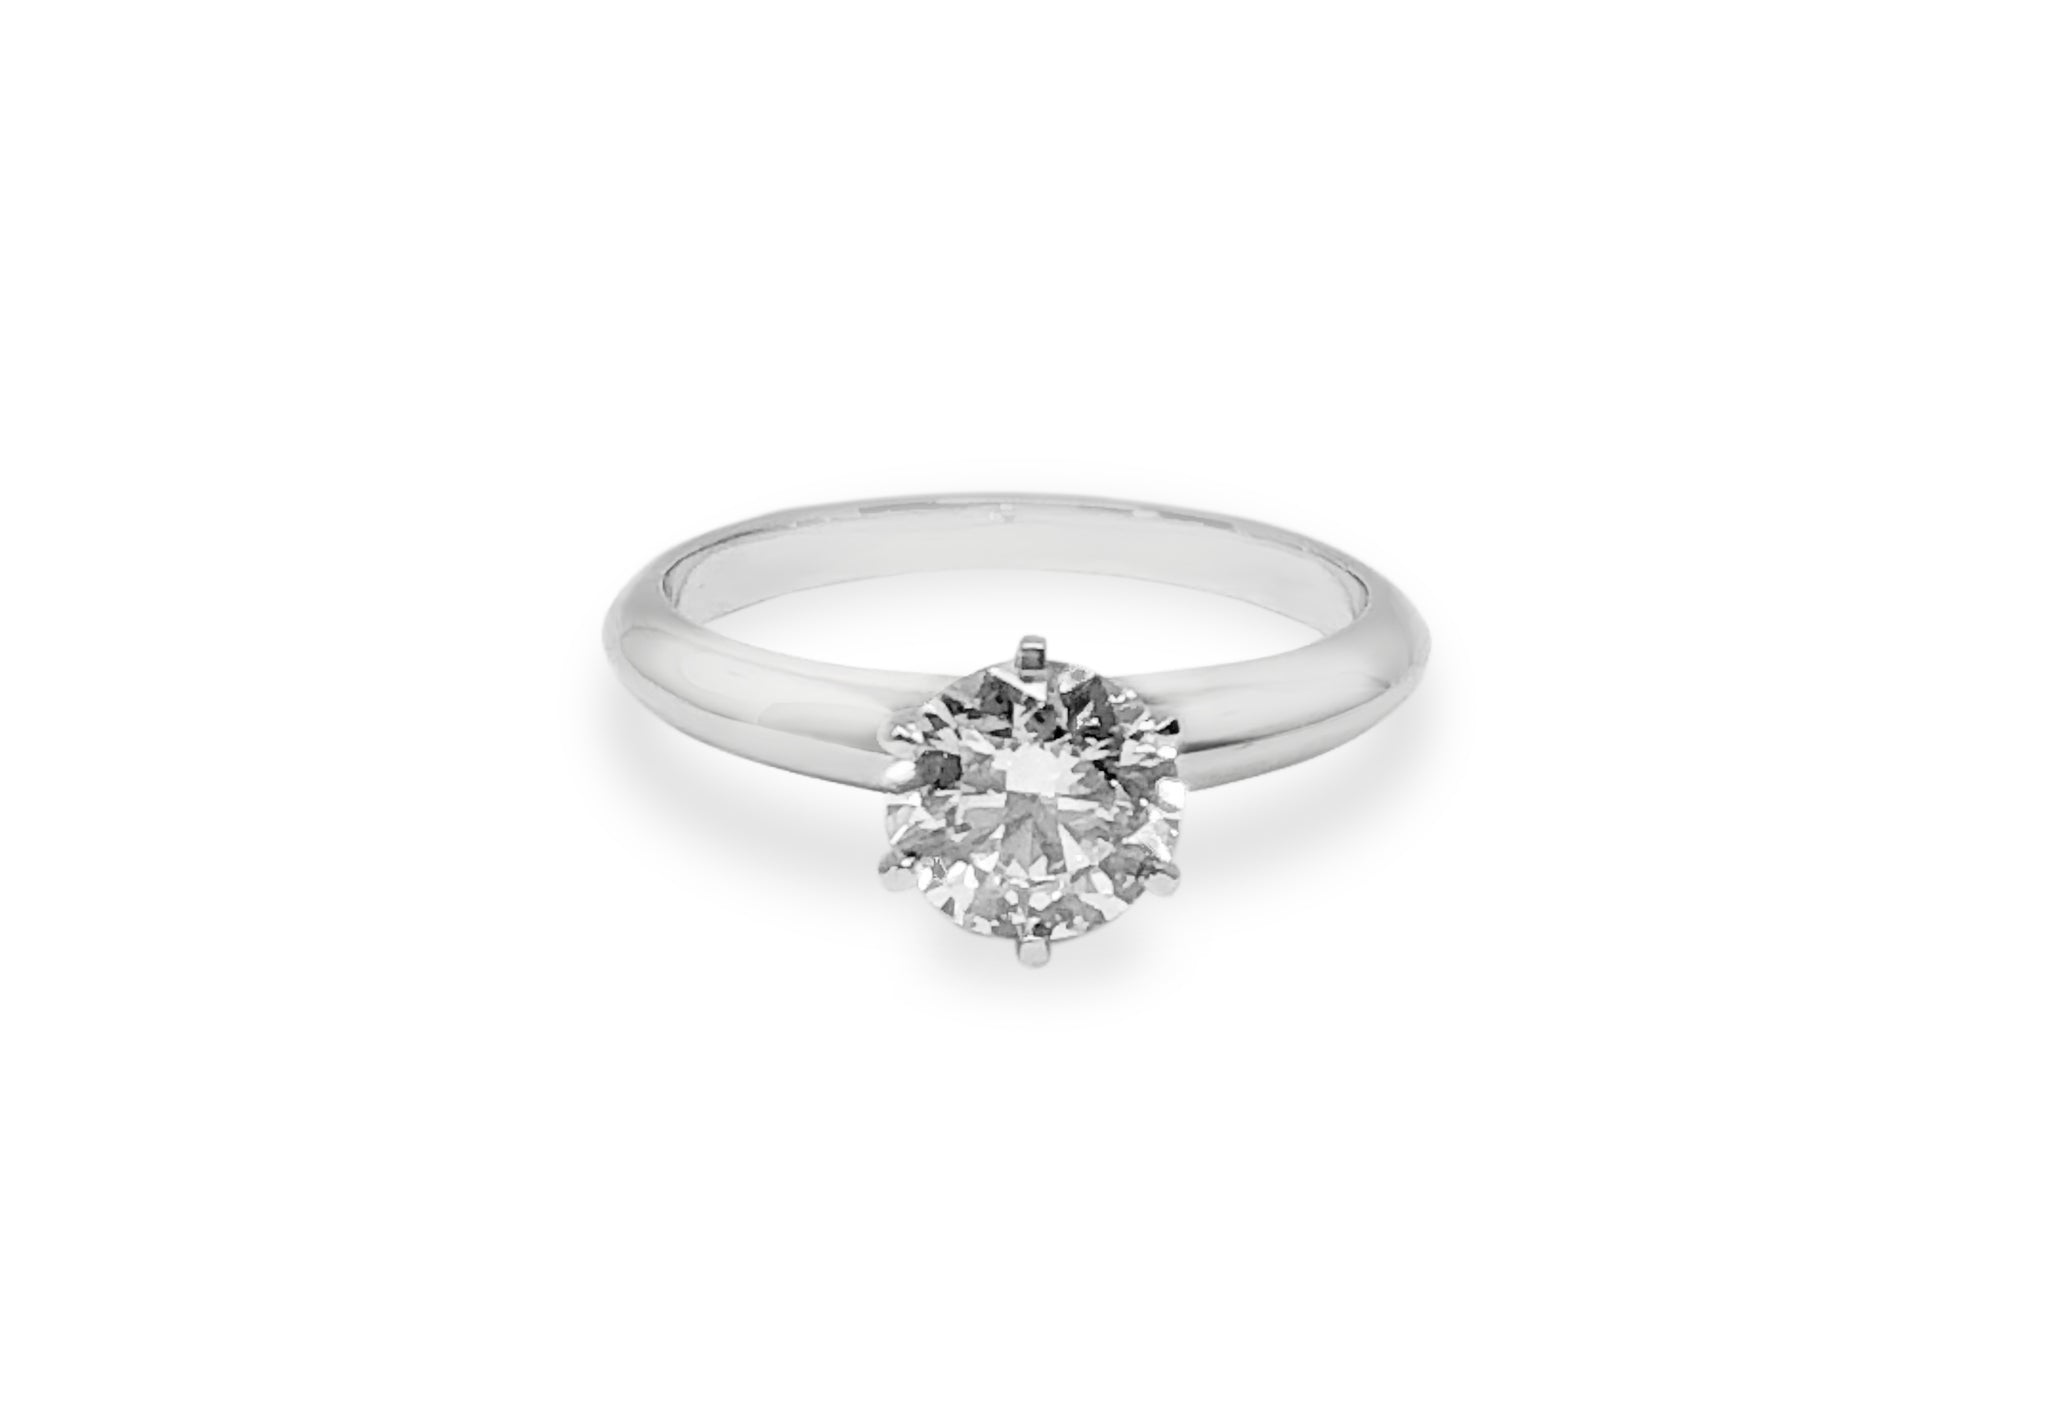 The One Solitaire Ring